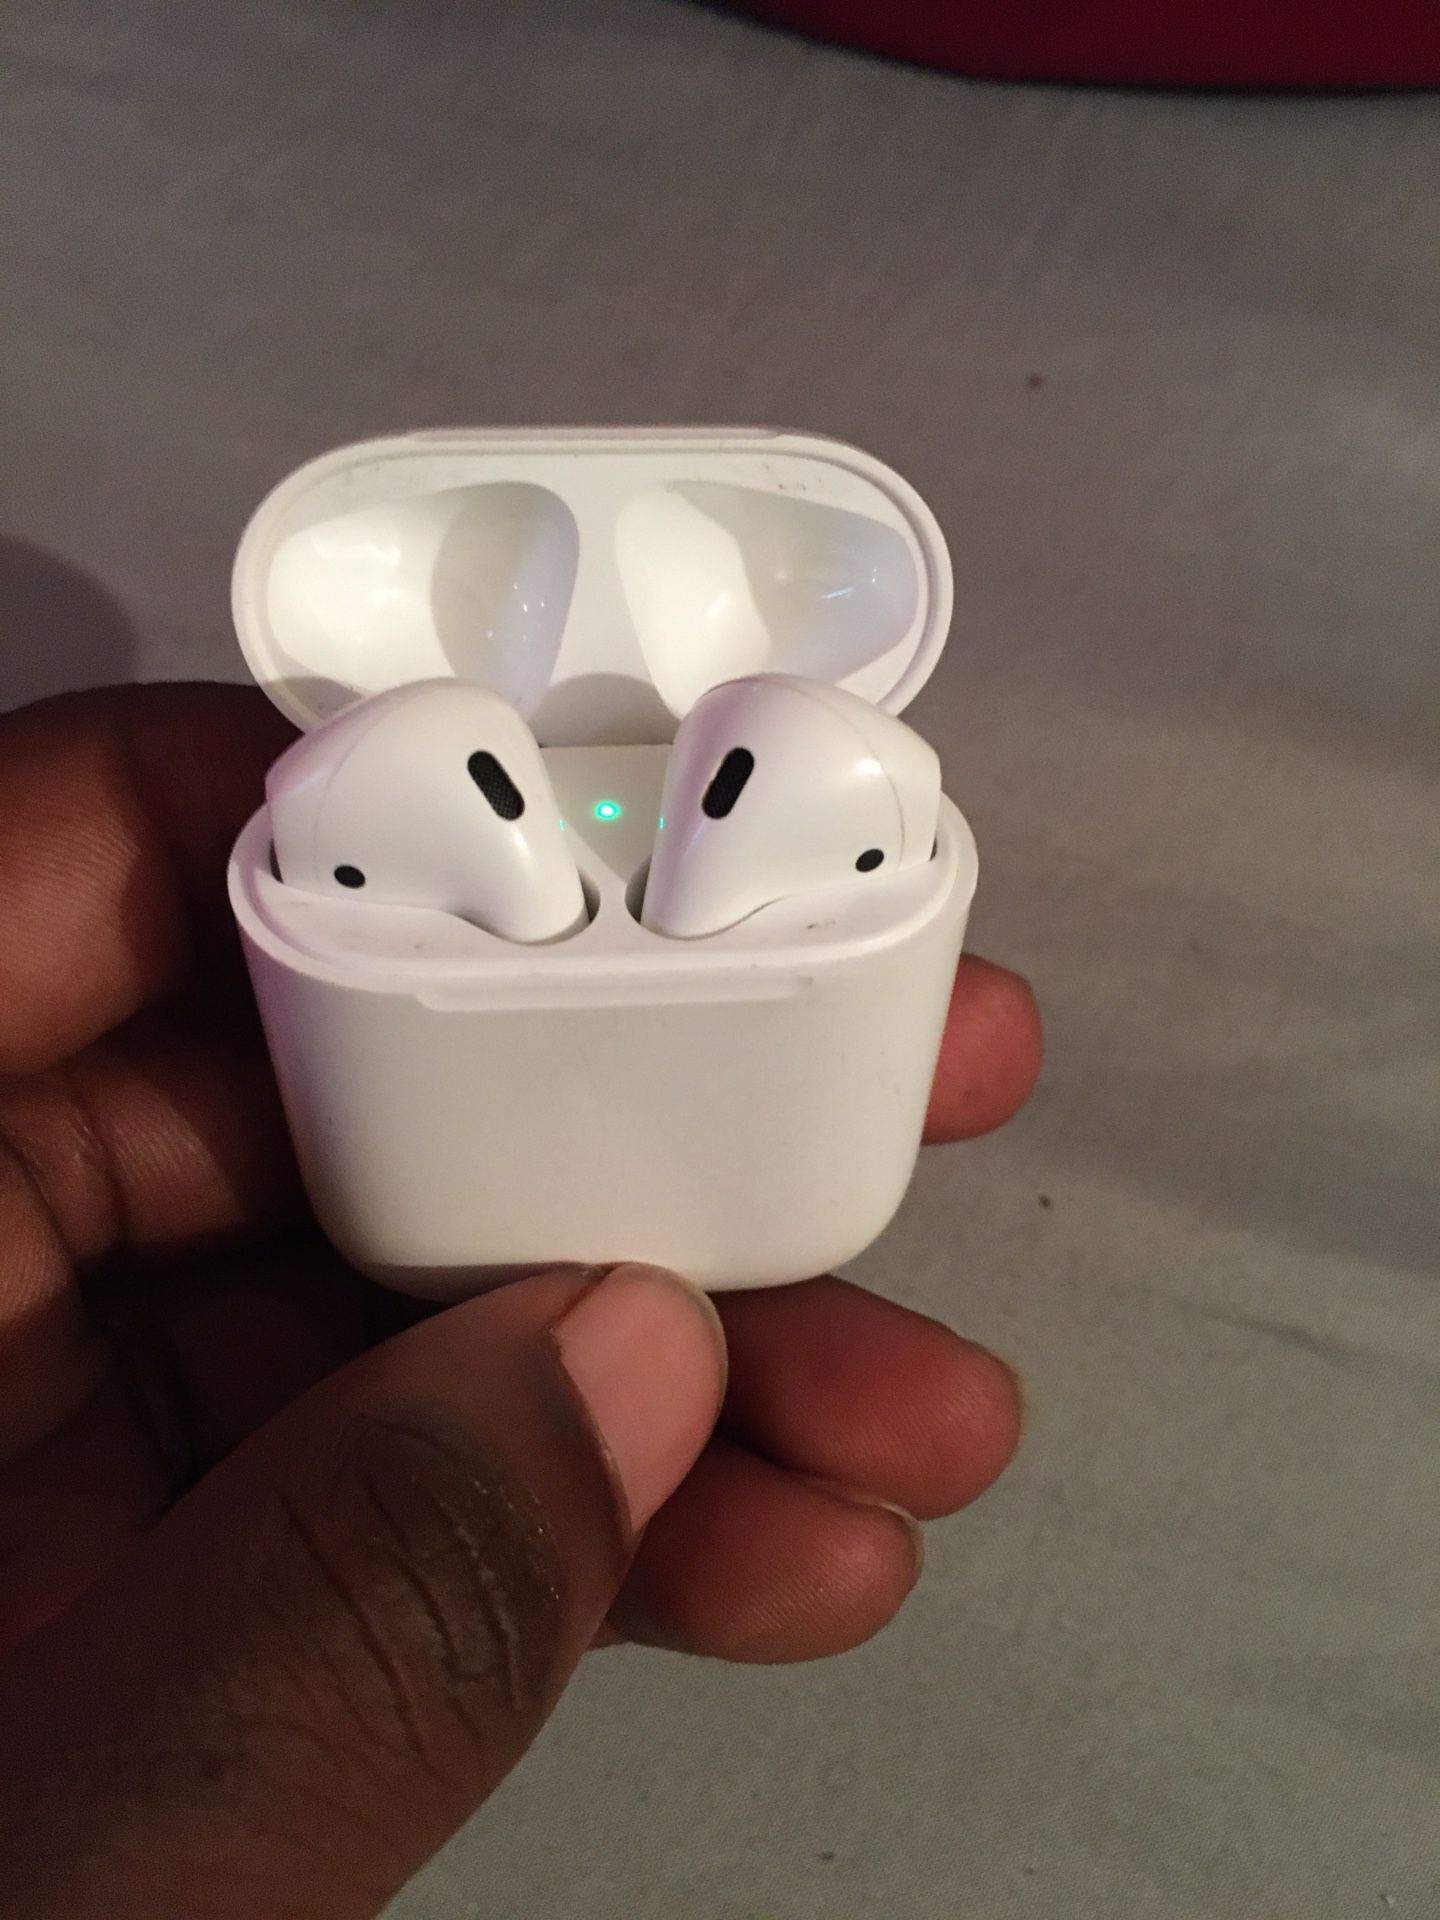 Apple AirPods no issues!